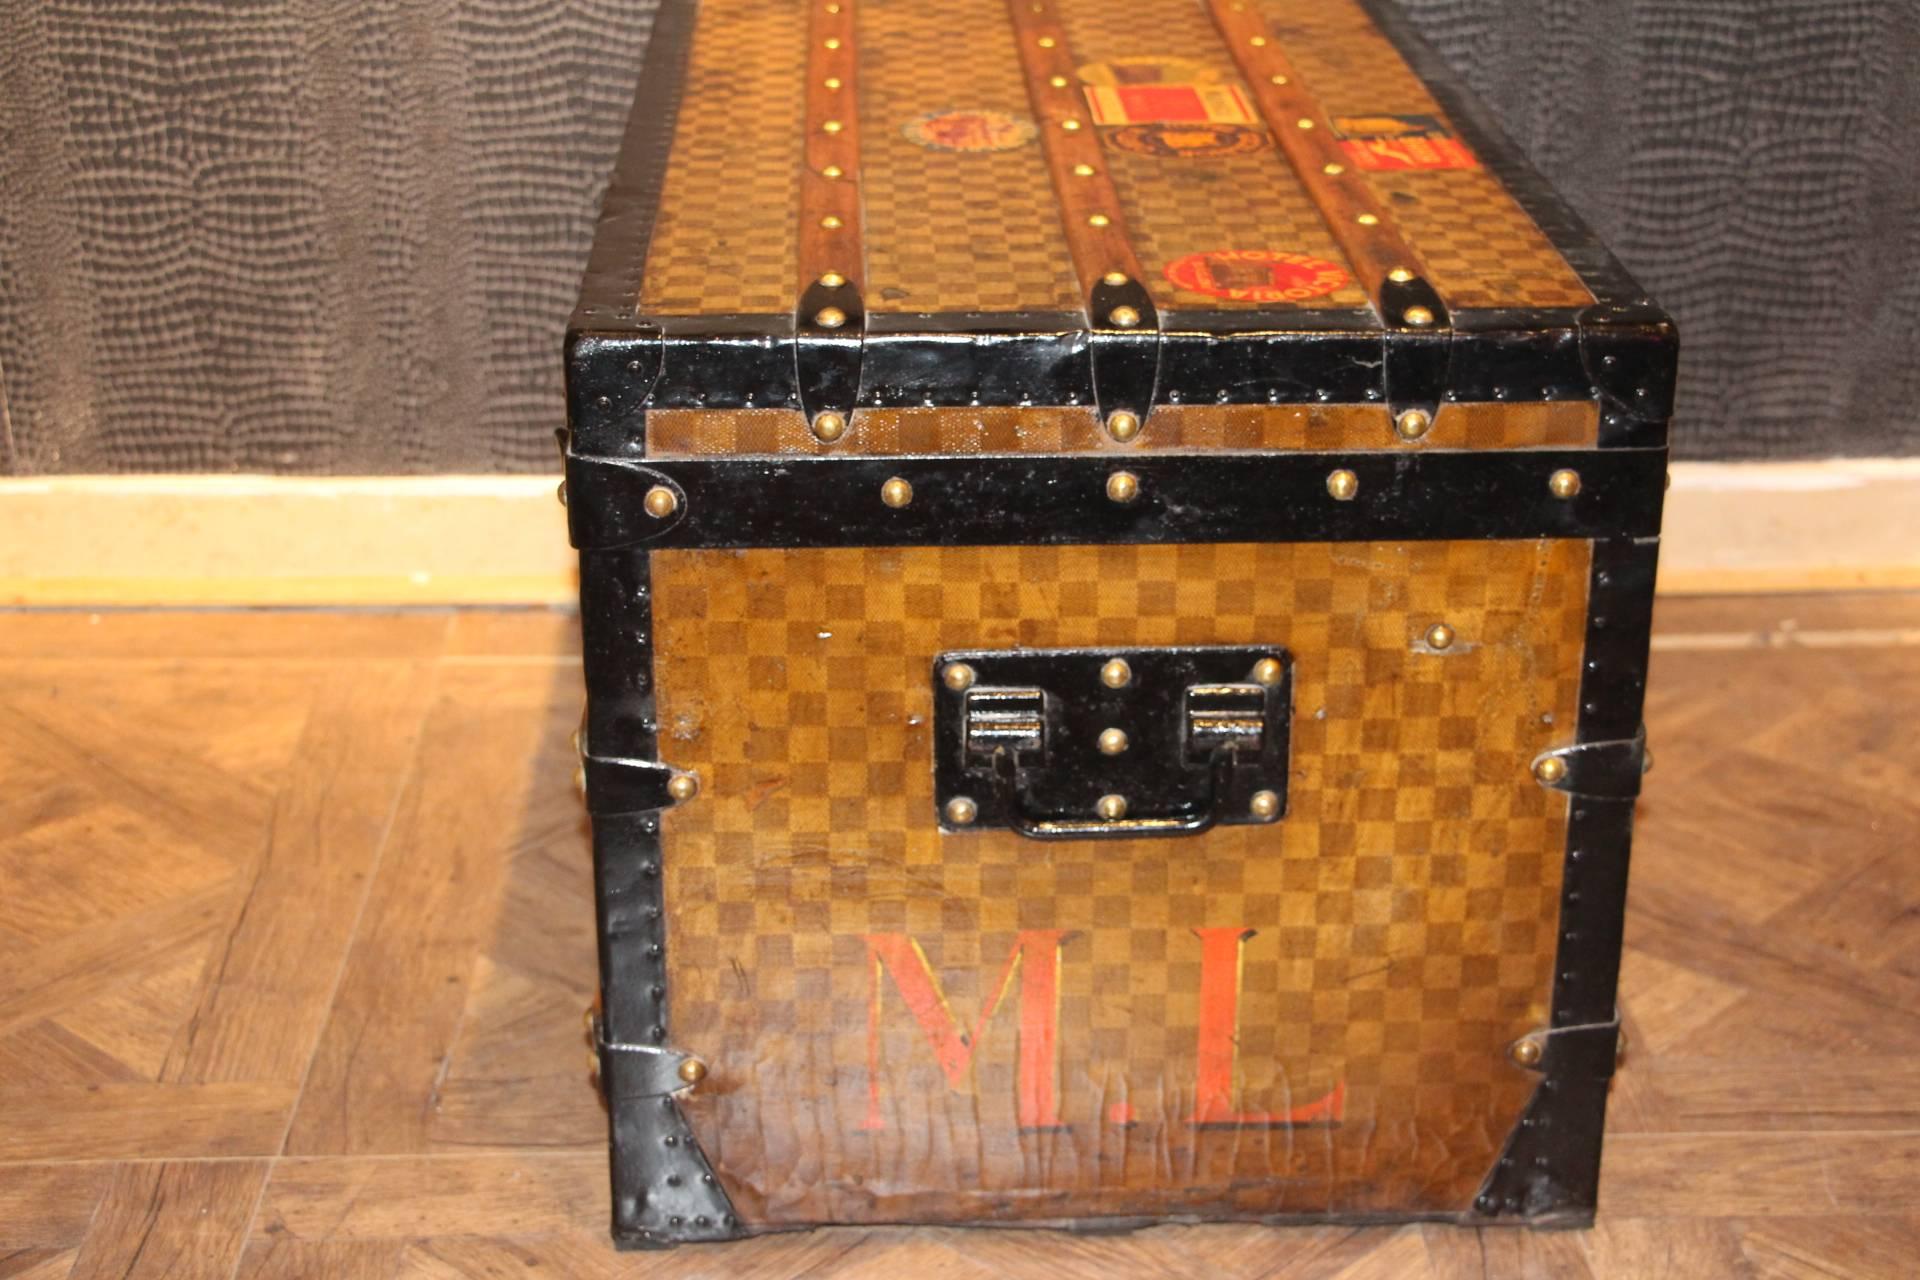 This trunk has got the rare and famous 